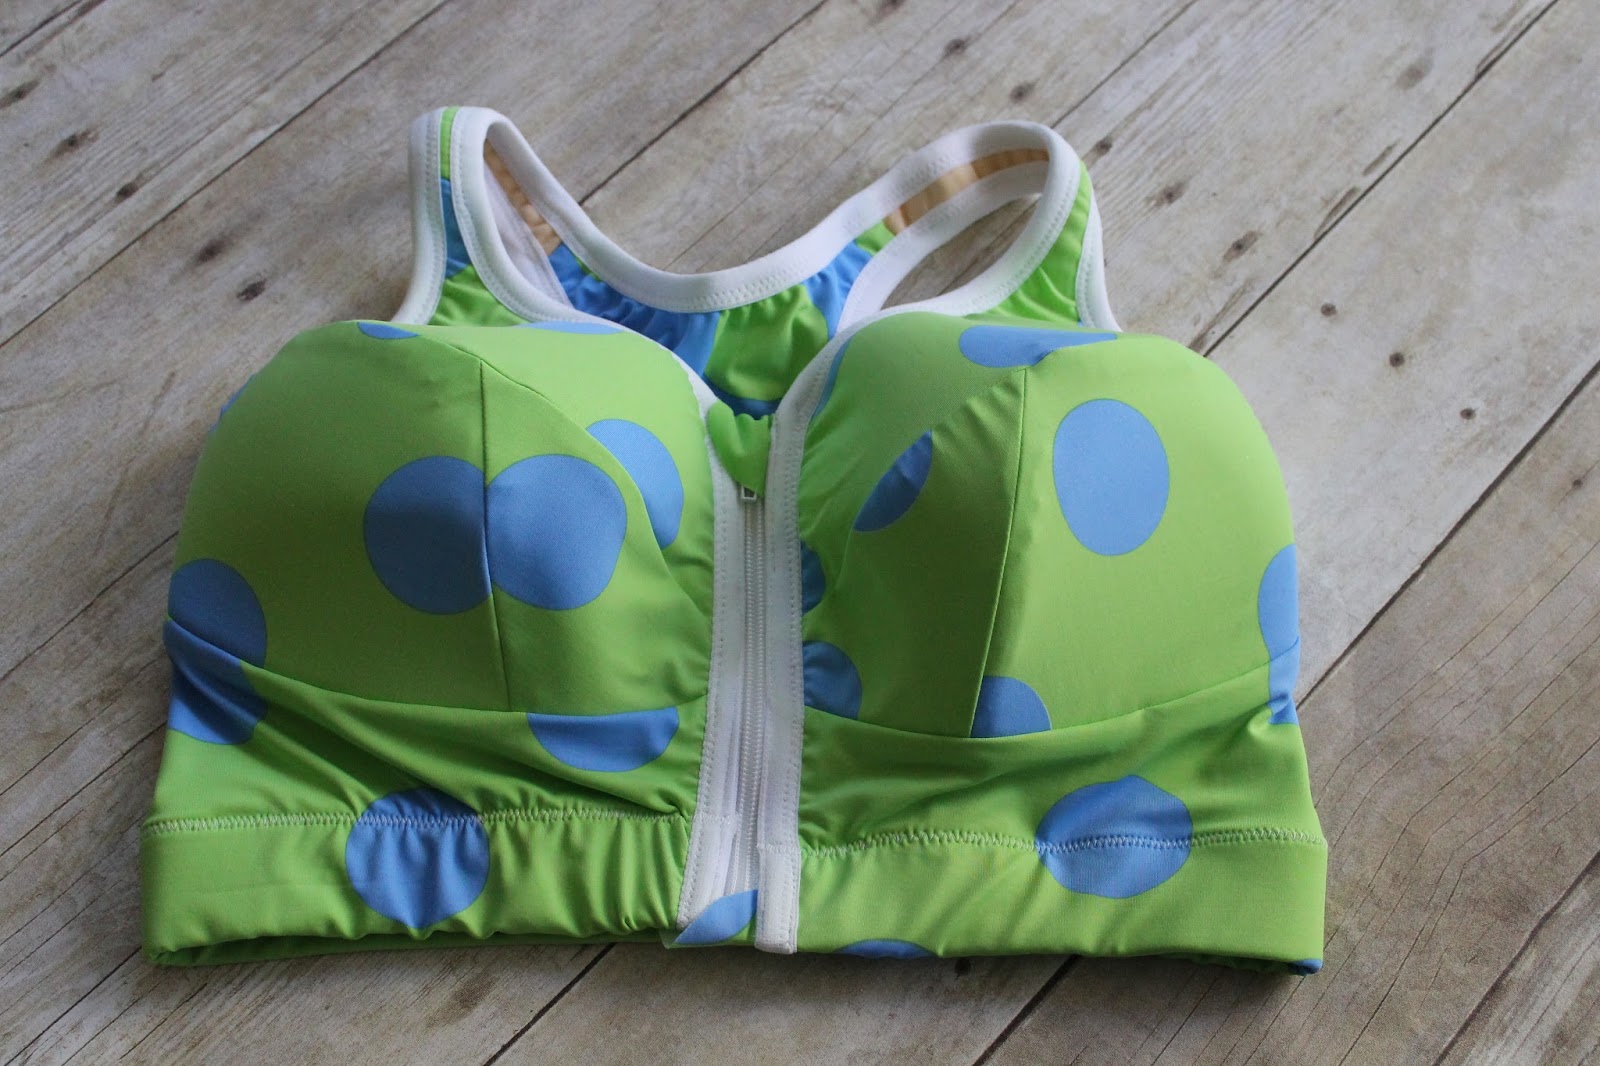 Sew Happily Ever After: 3 Tips for Successfully Sewing A Bra